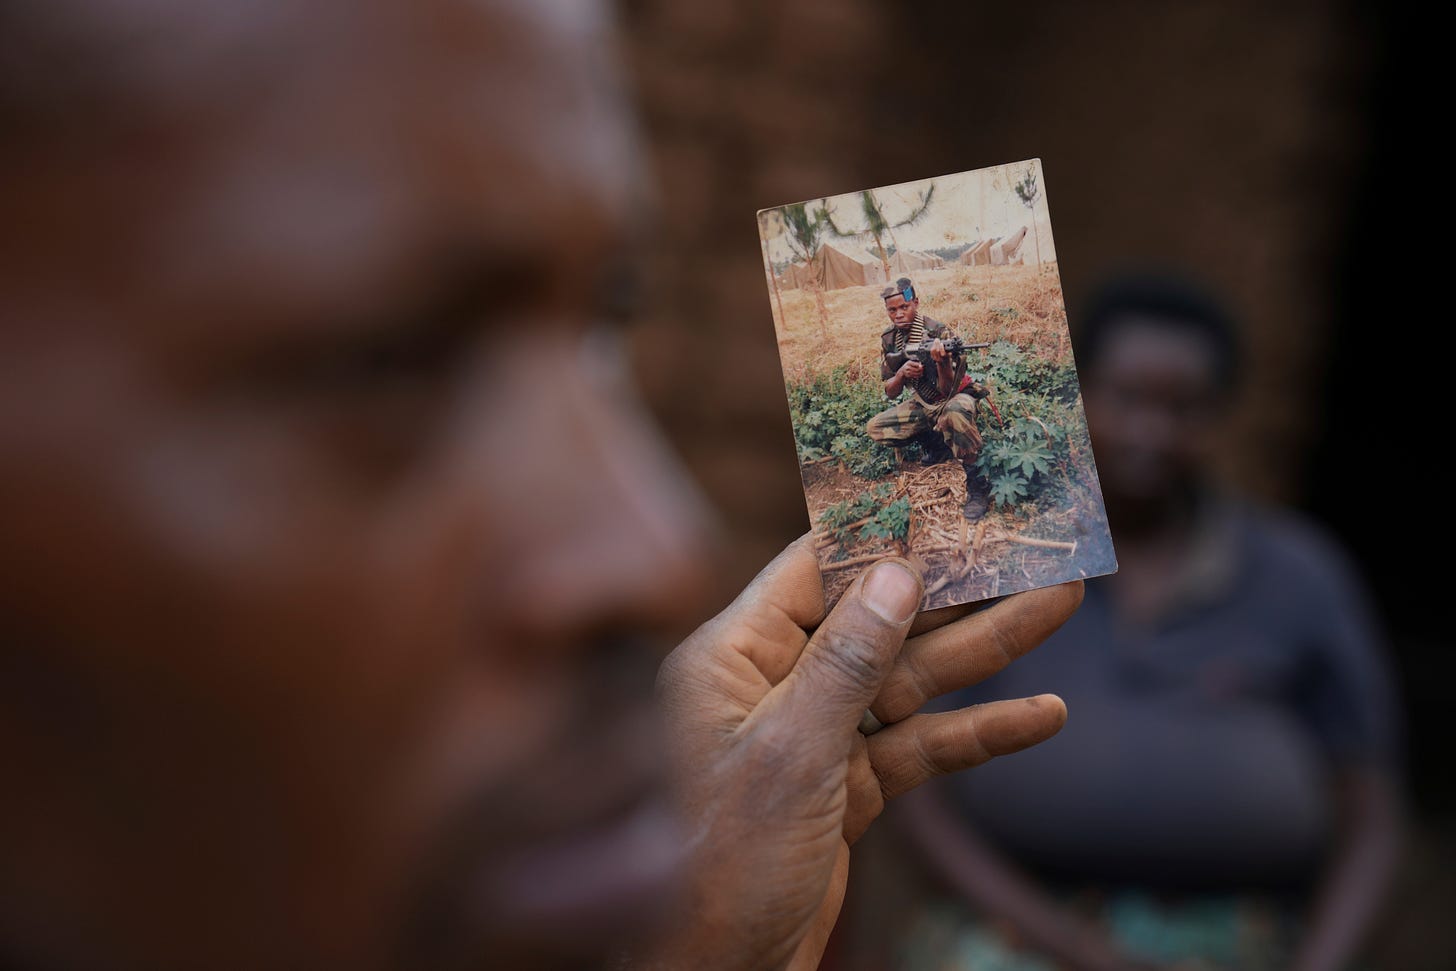 Patrick Hakizimana, a Hutu peasant who was jailed from 1996 to 2007 for his alleged role in the genocide as an army corporal, shows a photo during his time as a soldier in Gahanga the outskirts of Kigali, Rwanda.